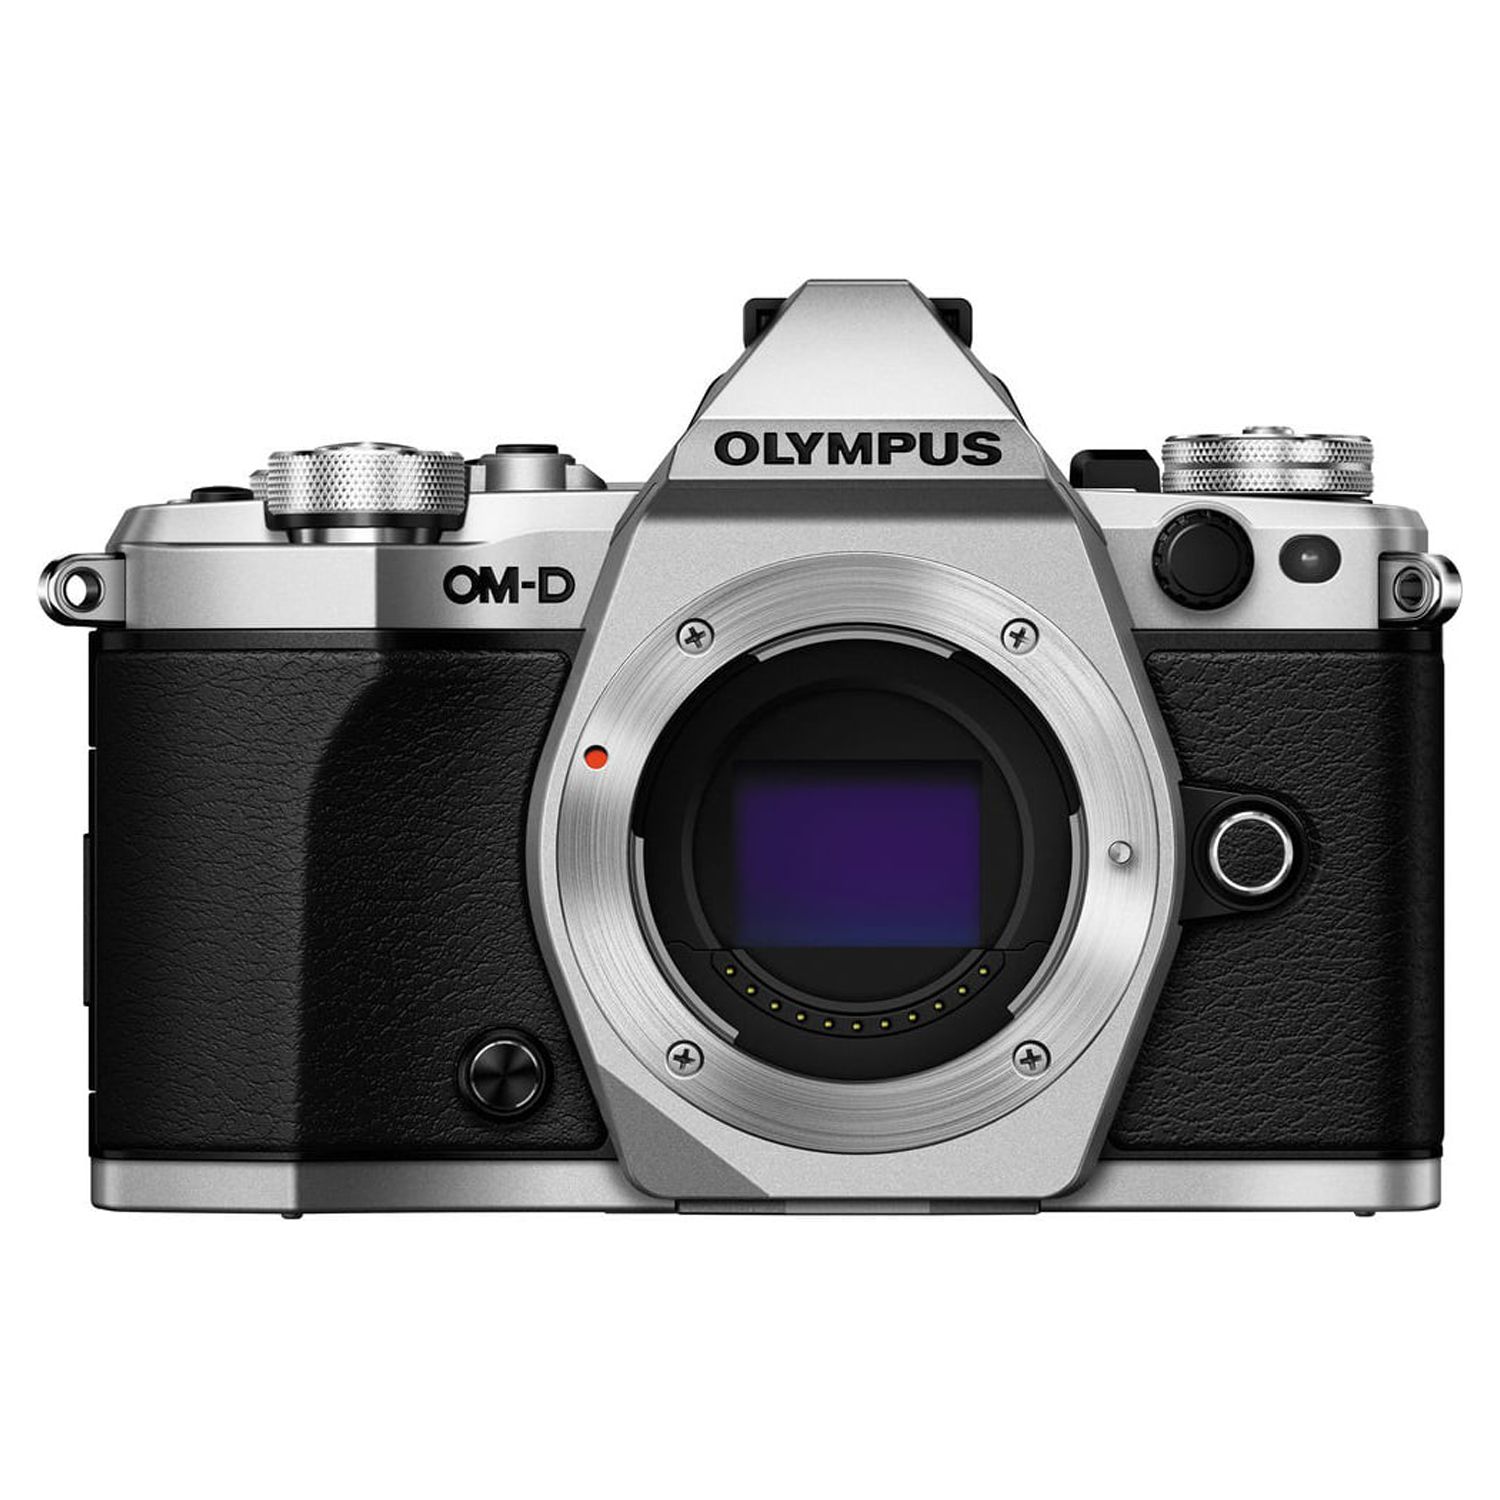 Olympus OM-D E-M5 Mark II Mirrorless Camera (Body Only), Silver - image 1 of 4